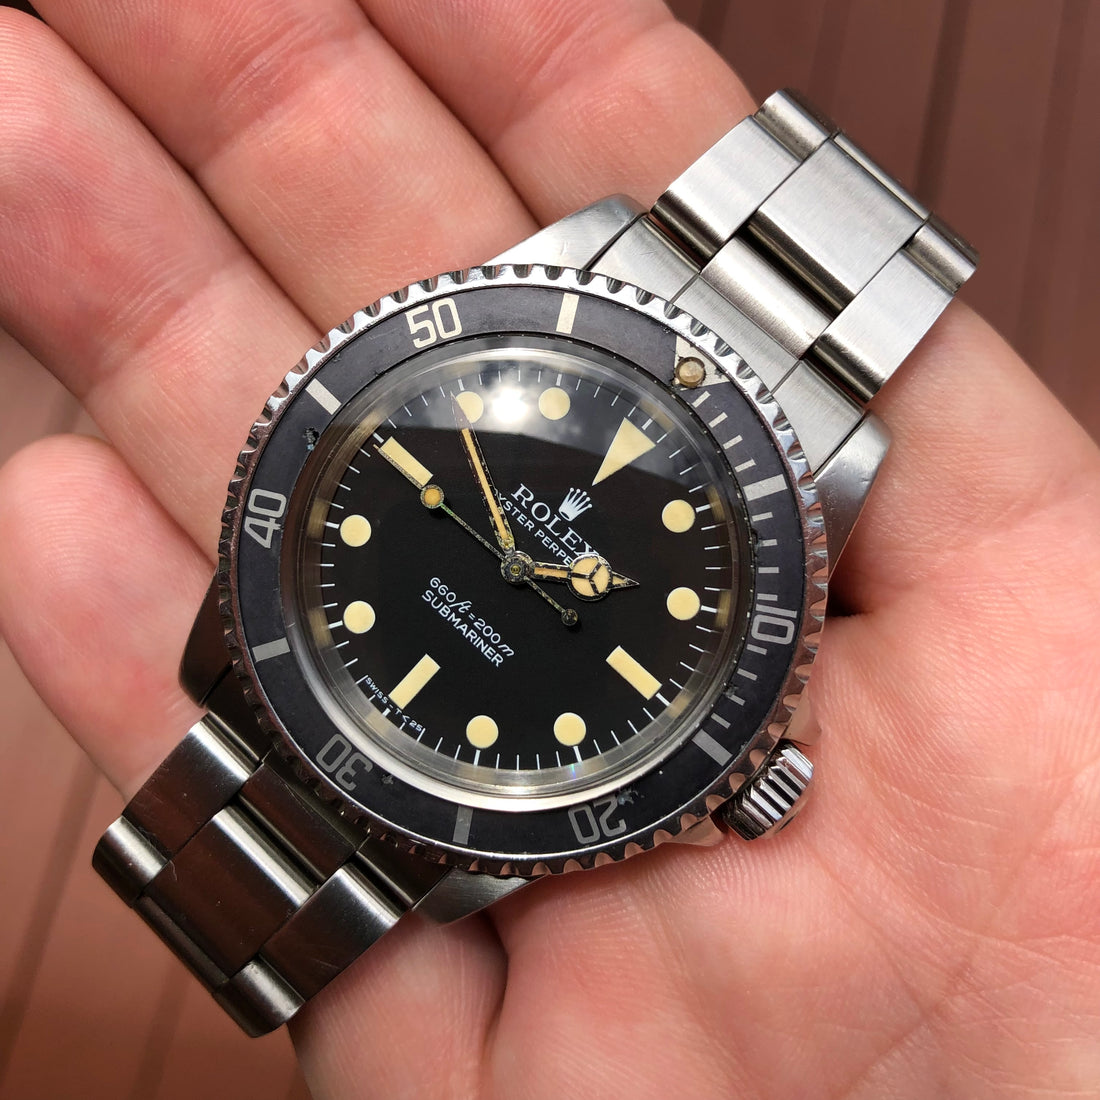 A Quick Brief with this 1978 Rolex Submariner 5513 Pre Comex Wristwatch with a Killer Ghost Insert